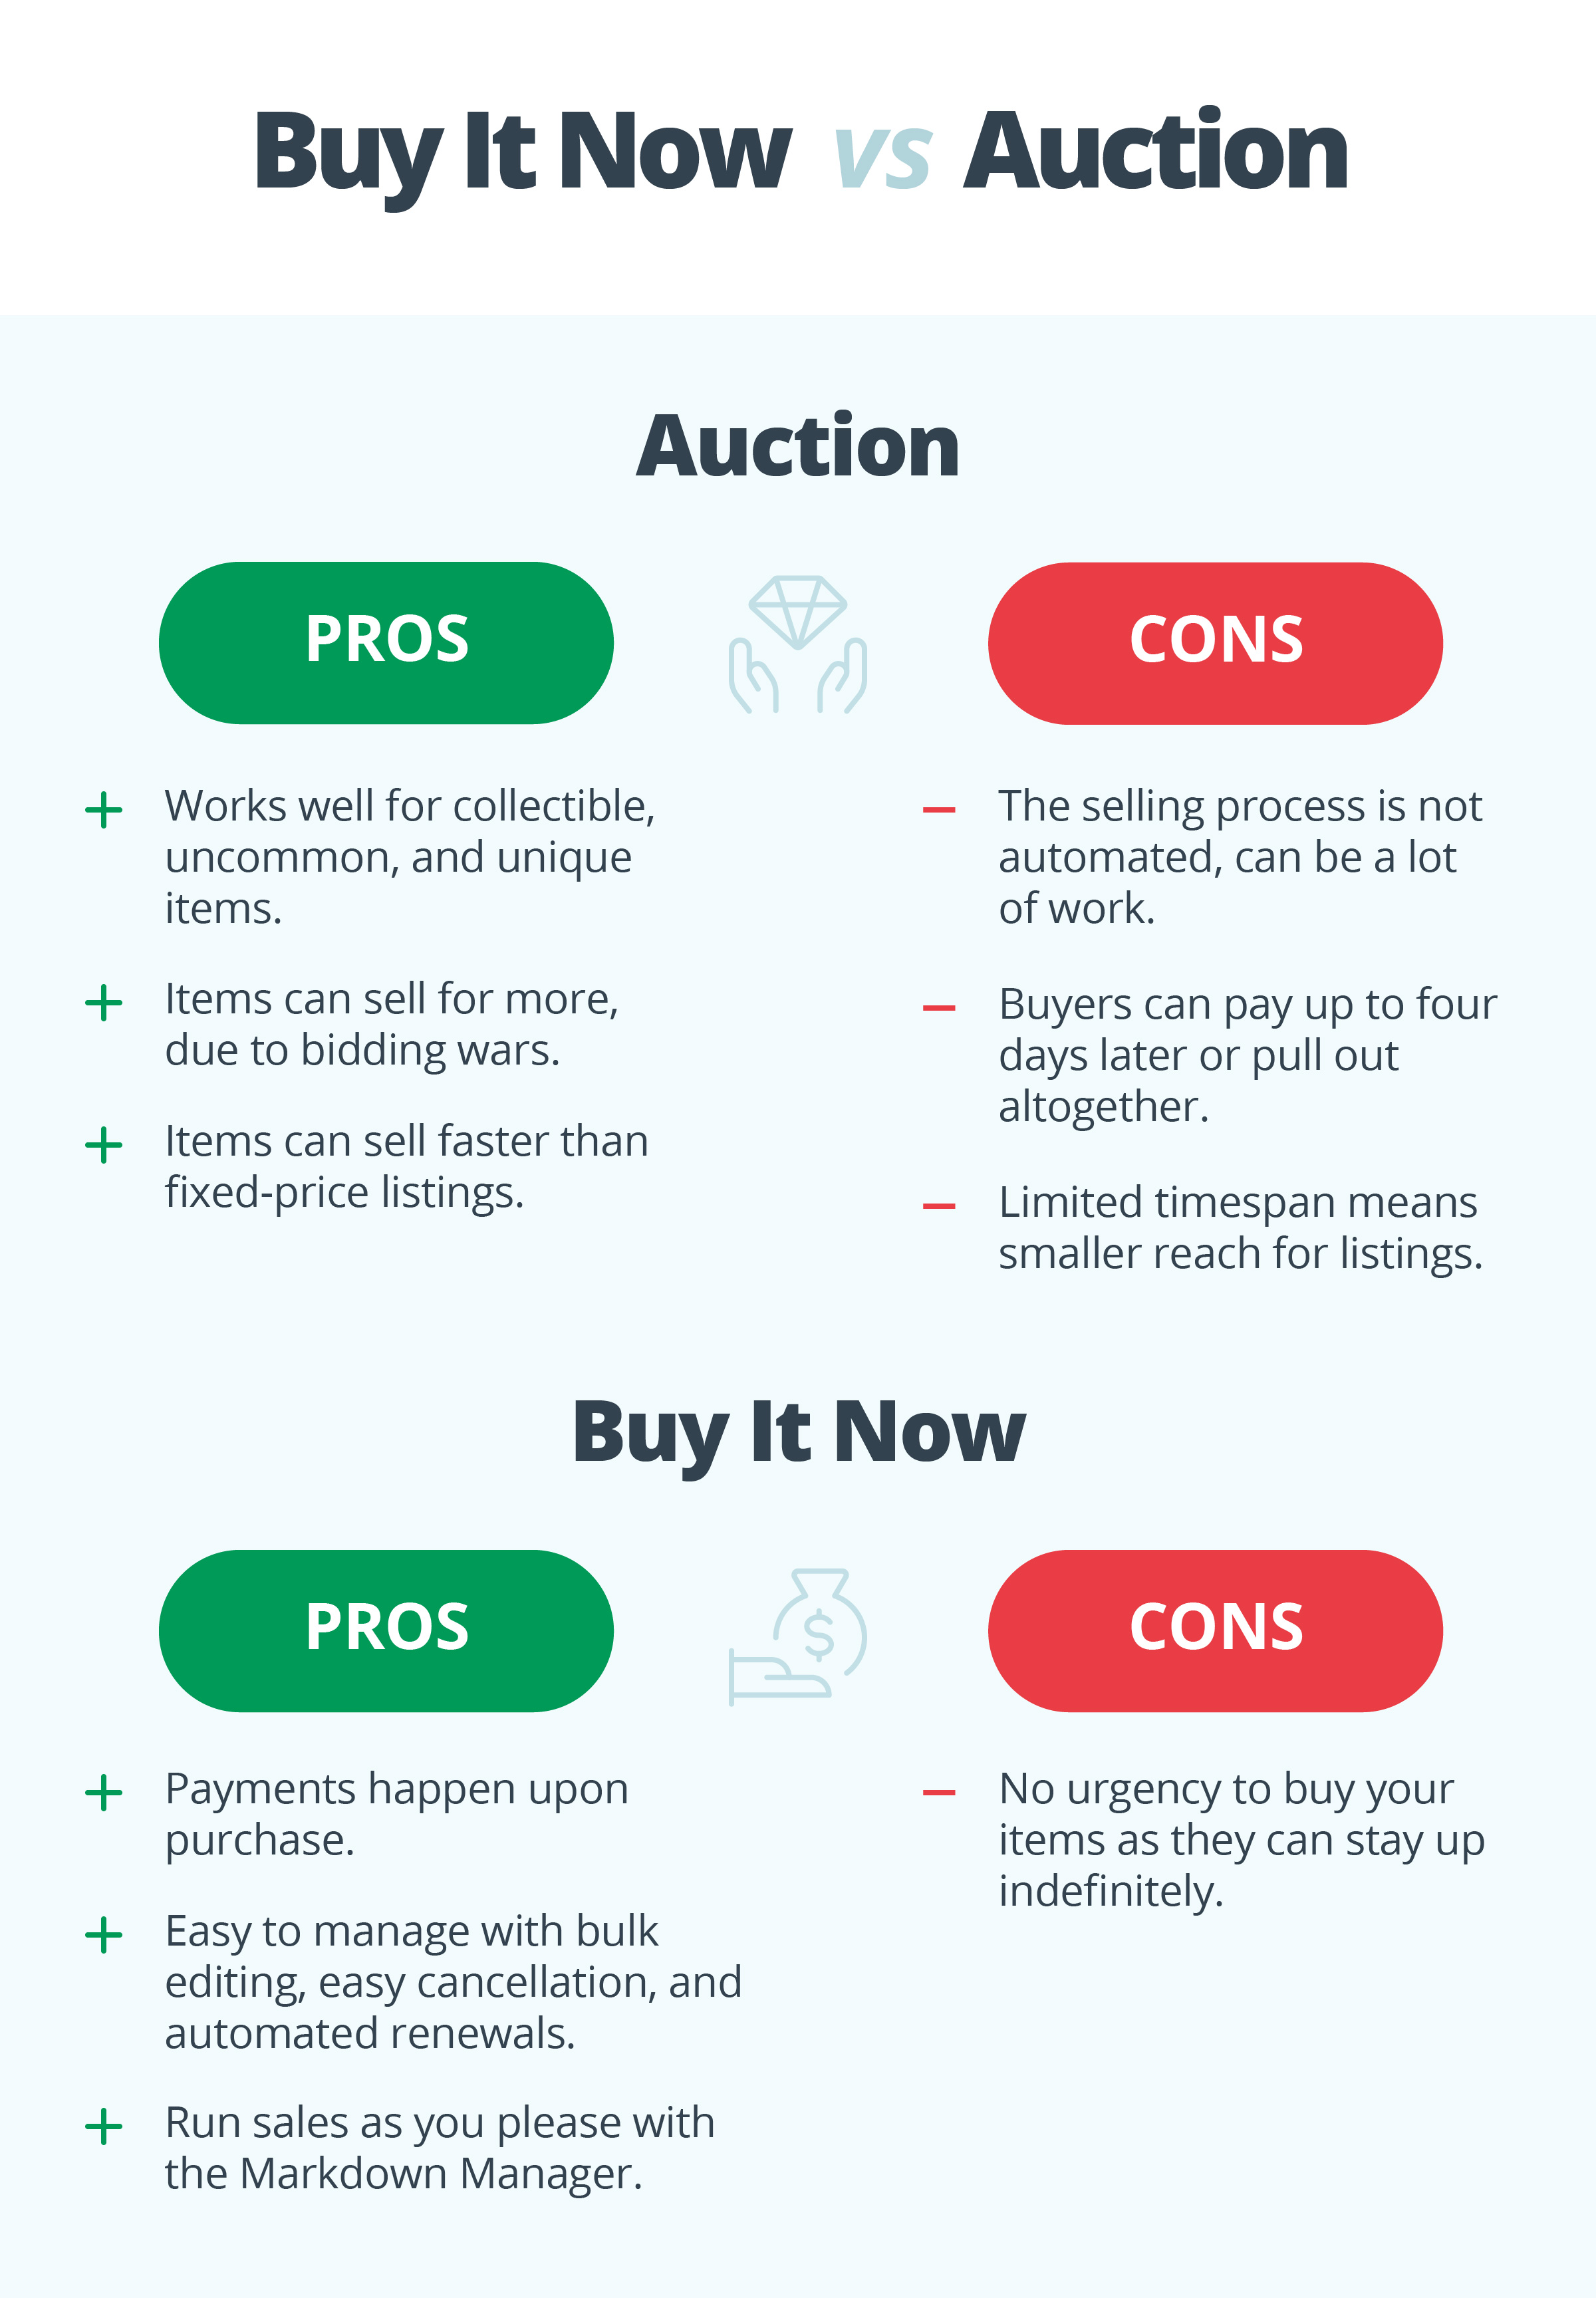 Buy It Now vs Auction: How to sell most effectively on